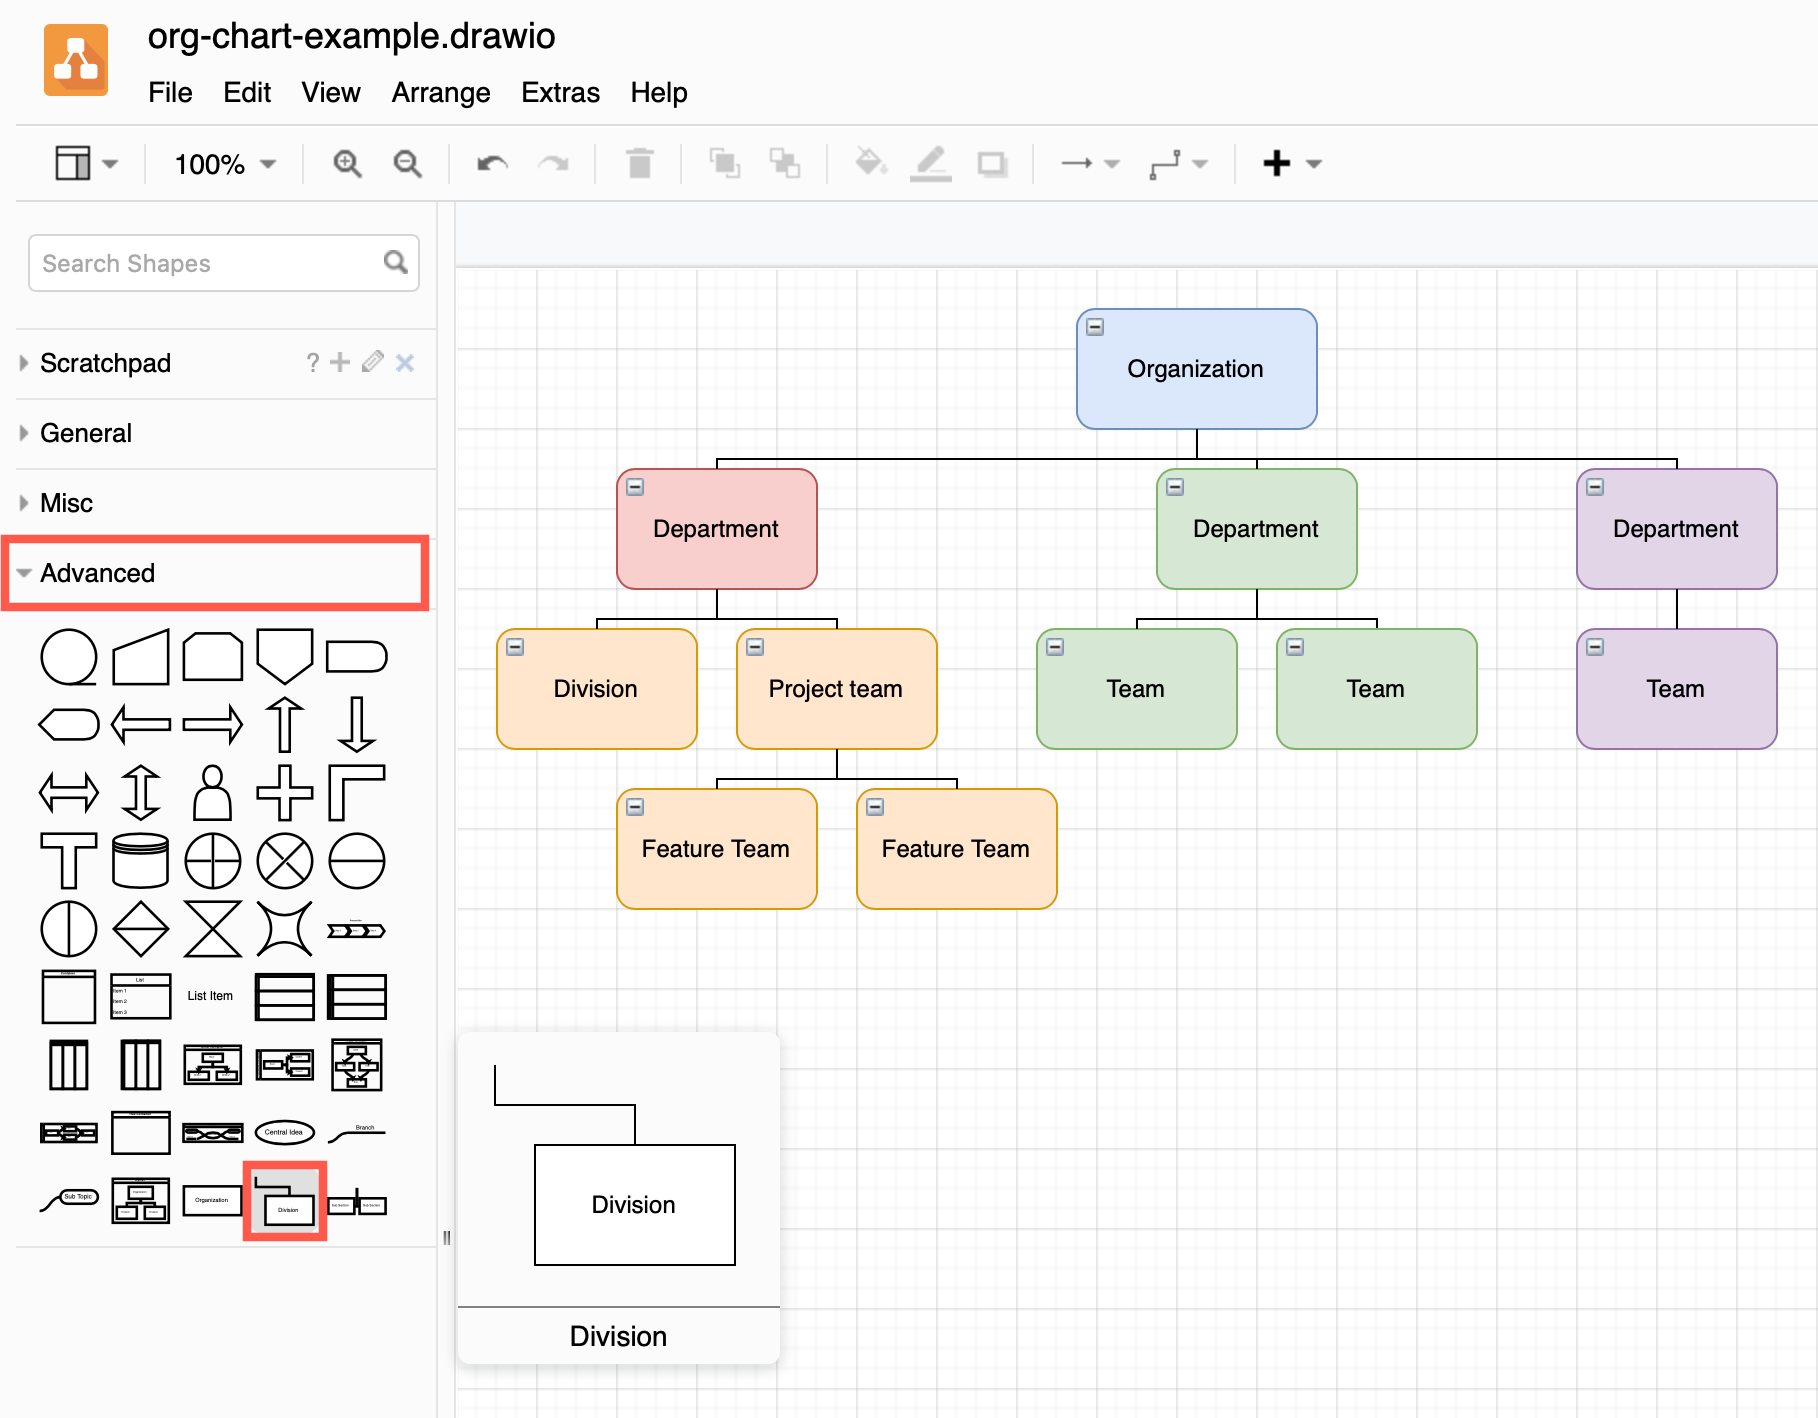 An org chart created using Advanced shapes in draw.io